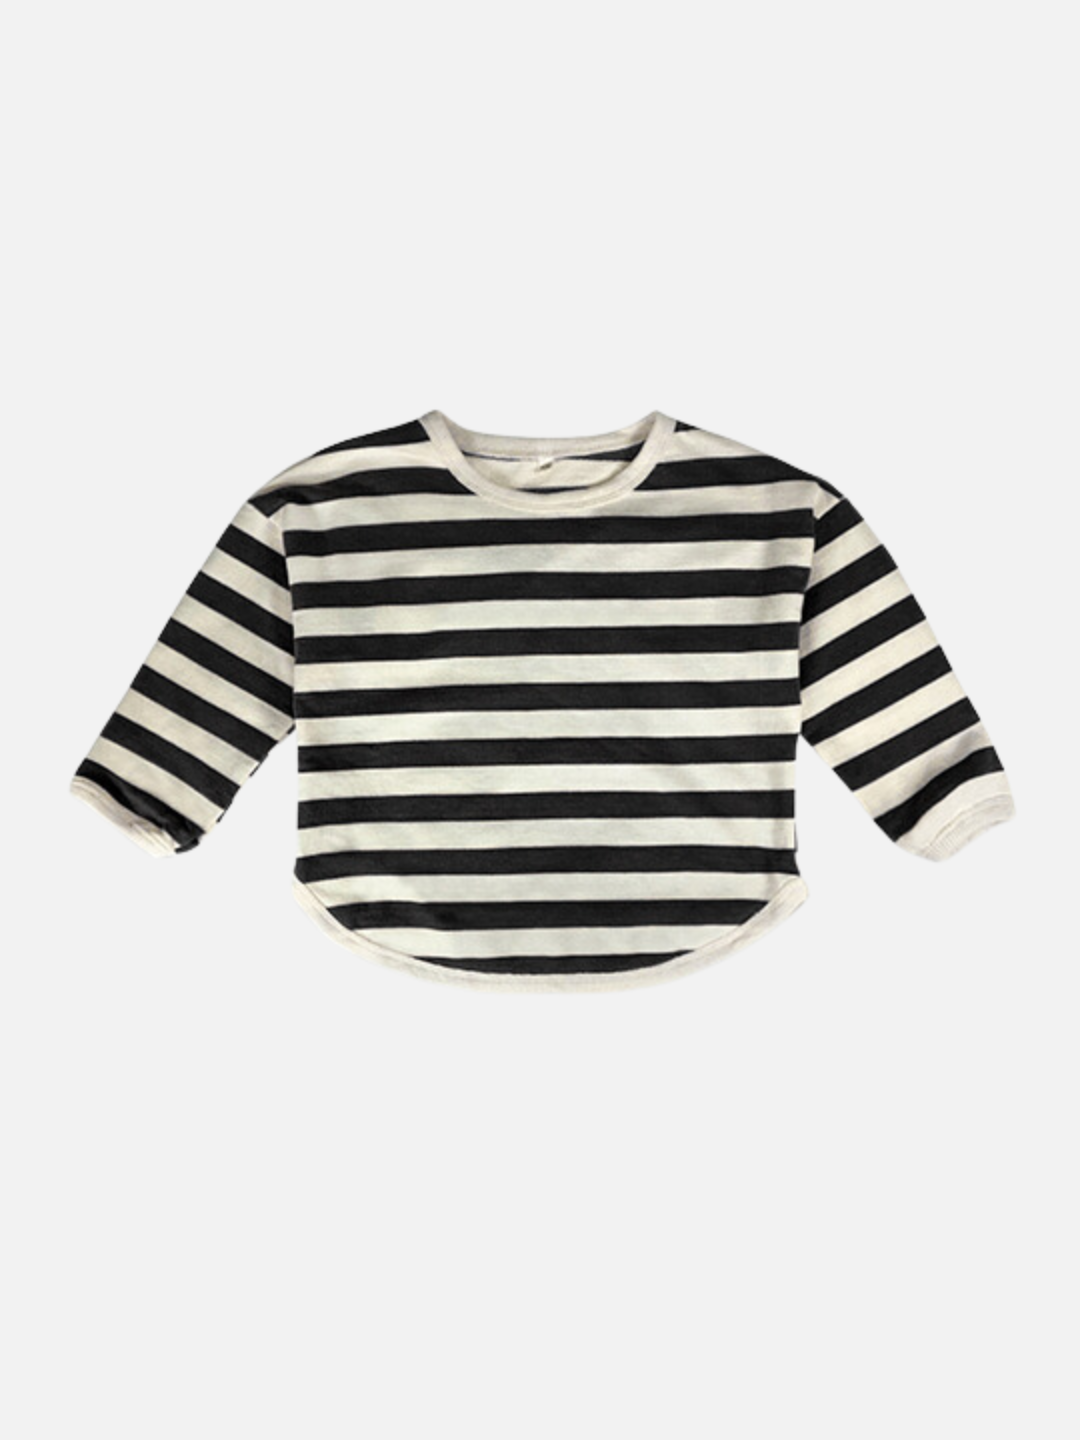 Black | A kids' tee shirt with a curved hem in black and white stripes